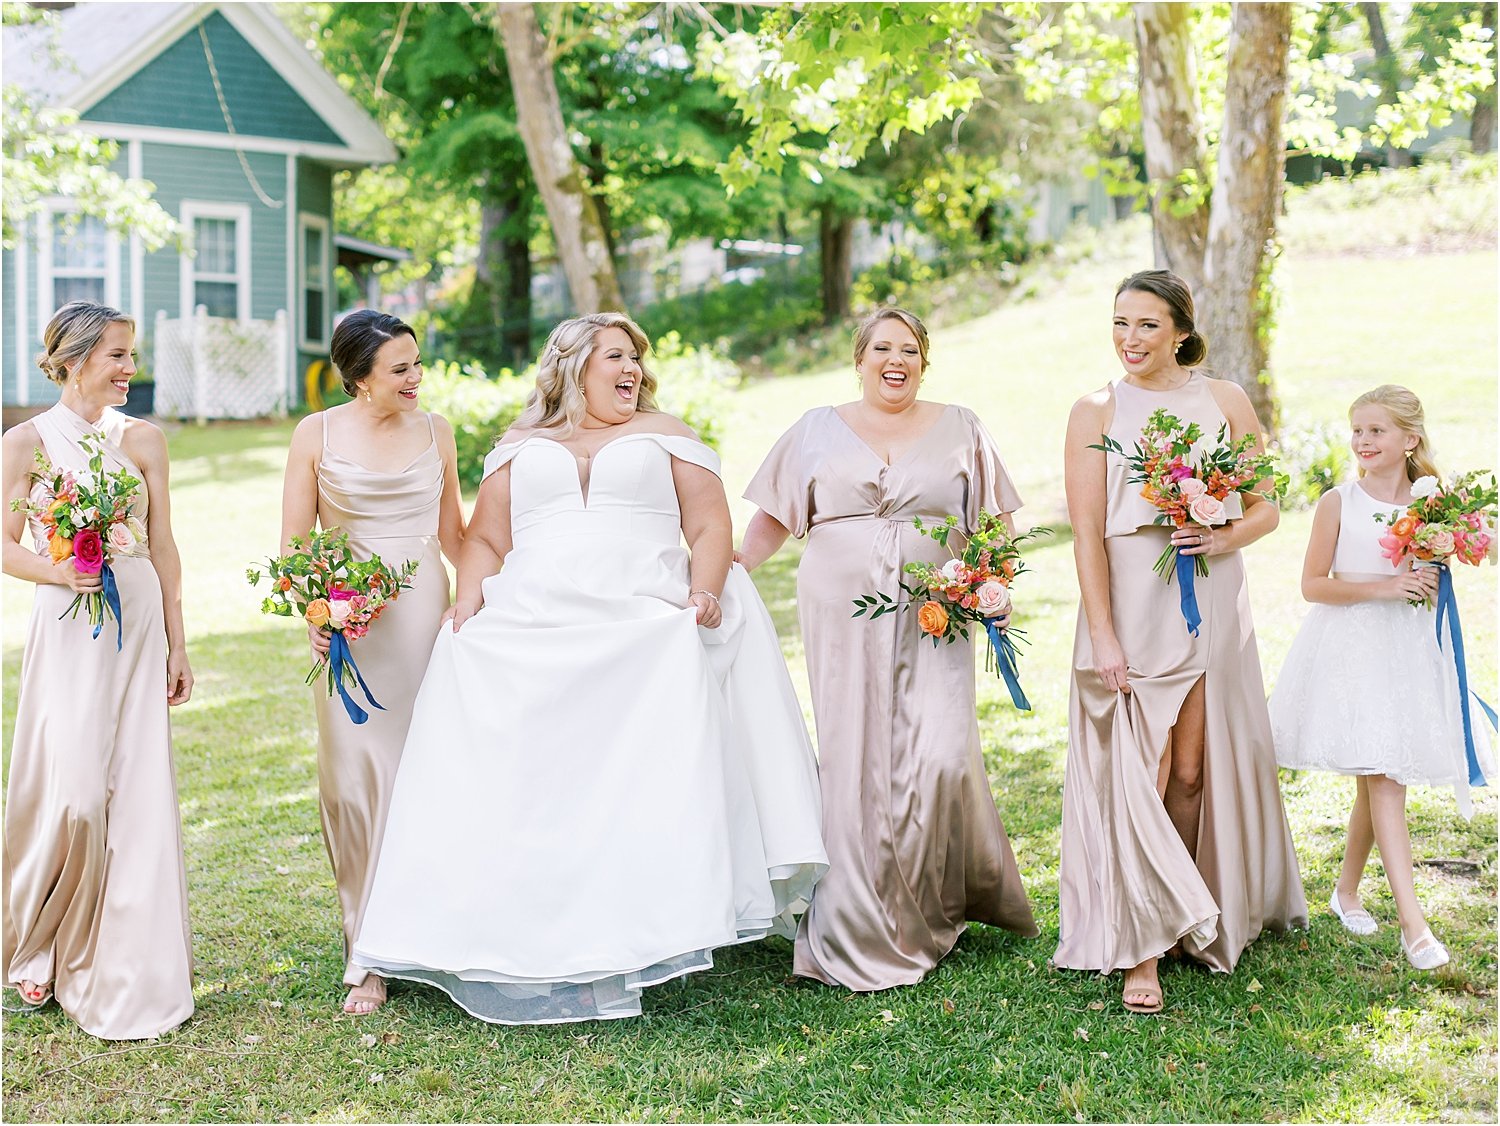 Laughing with your best friends - Summer Southern backyard wedding